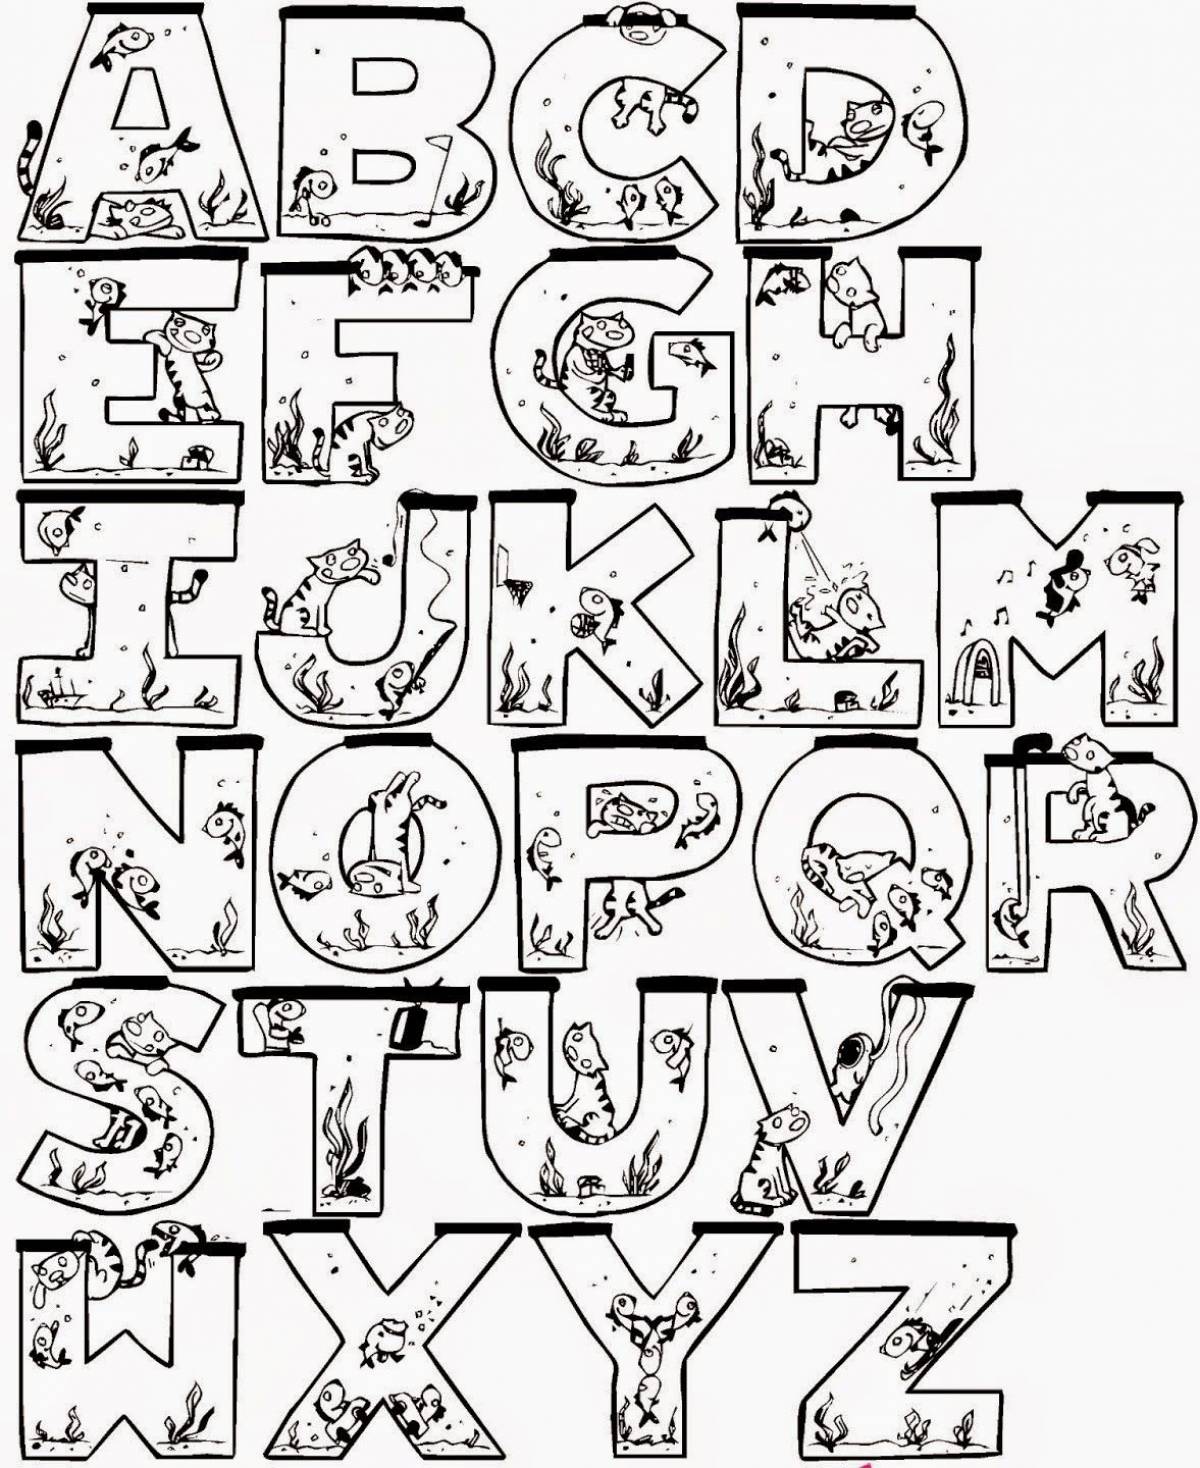 Coloring Pages Alphabet lore english (36 pcs) - download or print for ...